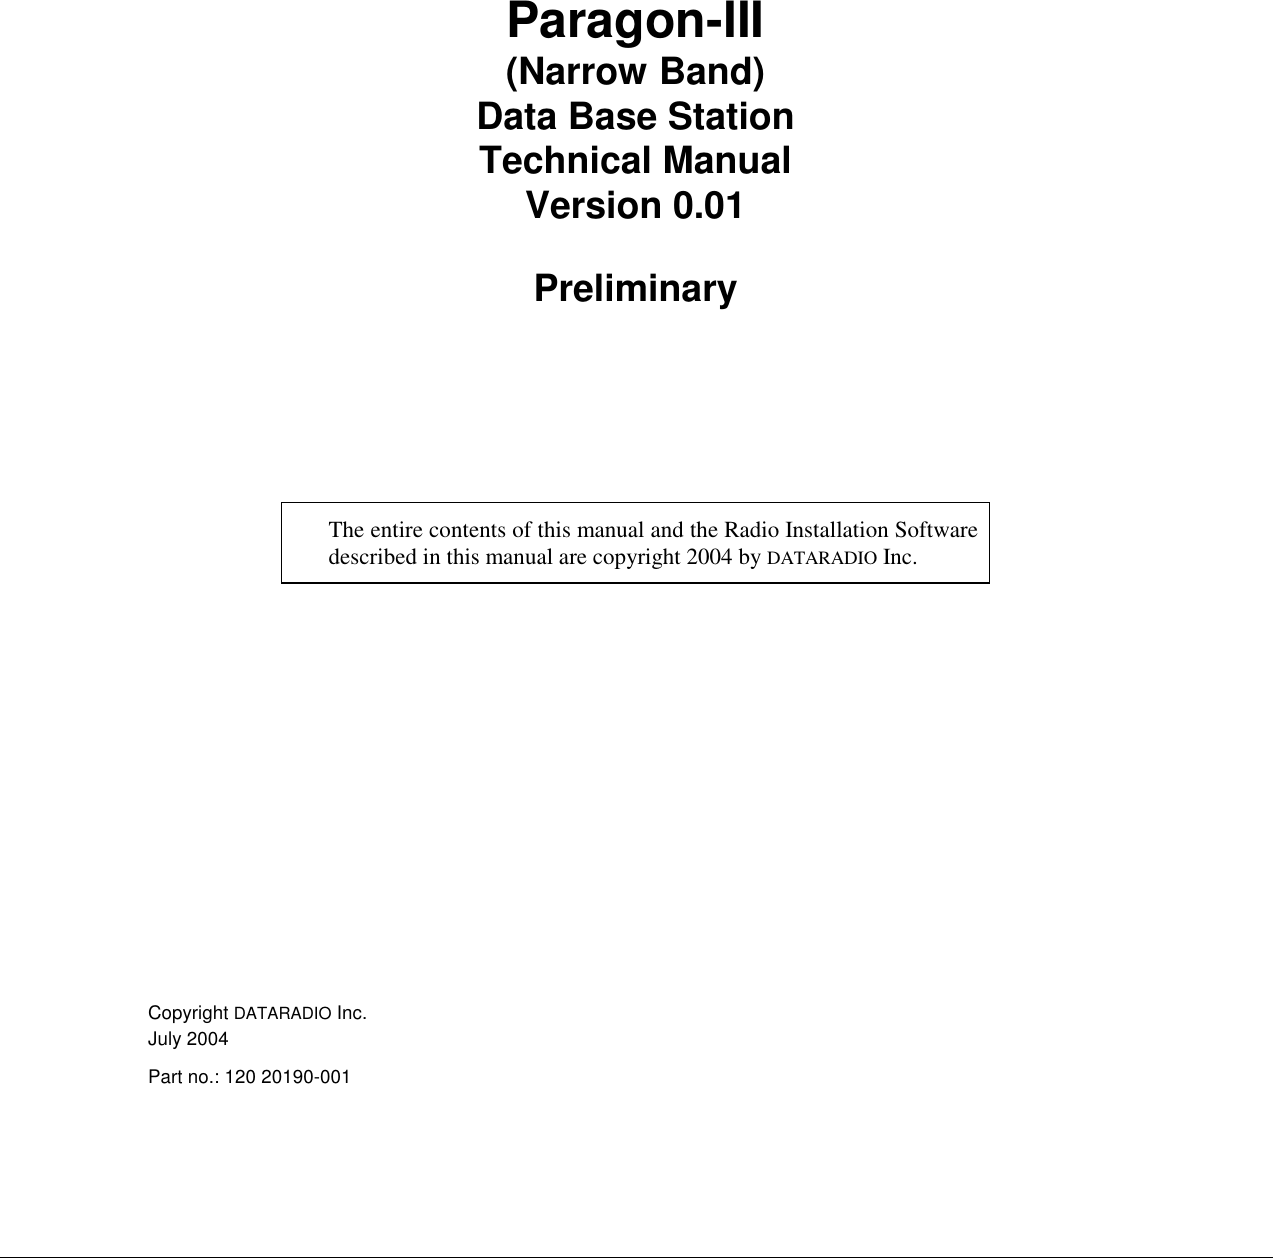 Paragon-III(Narrow Band)Data Base StationTechnical ManualVersion 0.01PreliminaryThe entire contents of this manual and the Radio Installation Softwaredescribed in this manual are copyright 2004 by DATARADIO Inc.Copyright DATARADIO Inc.July 2004Part no.: 120 20190-001